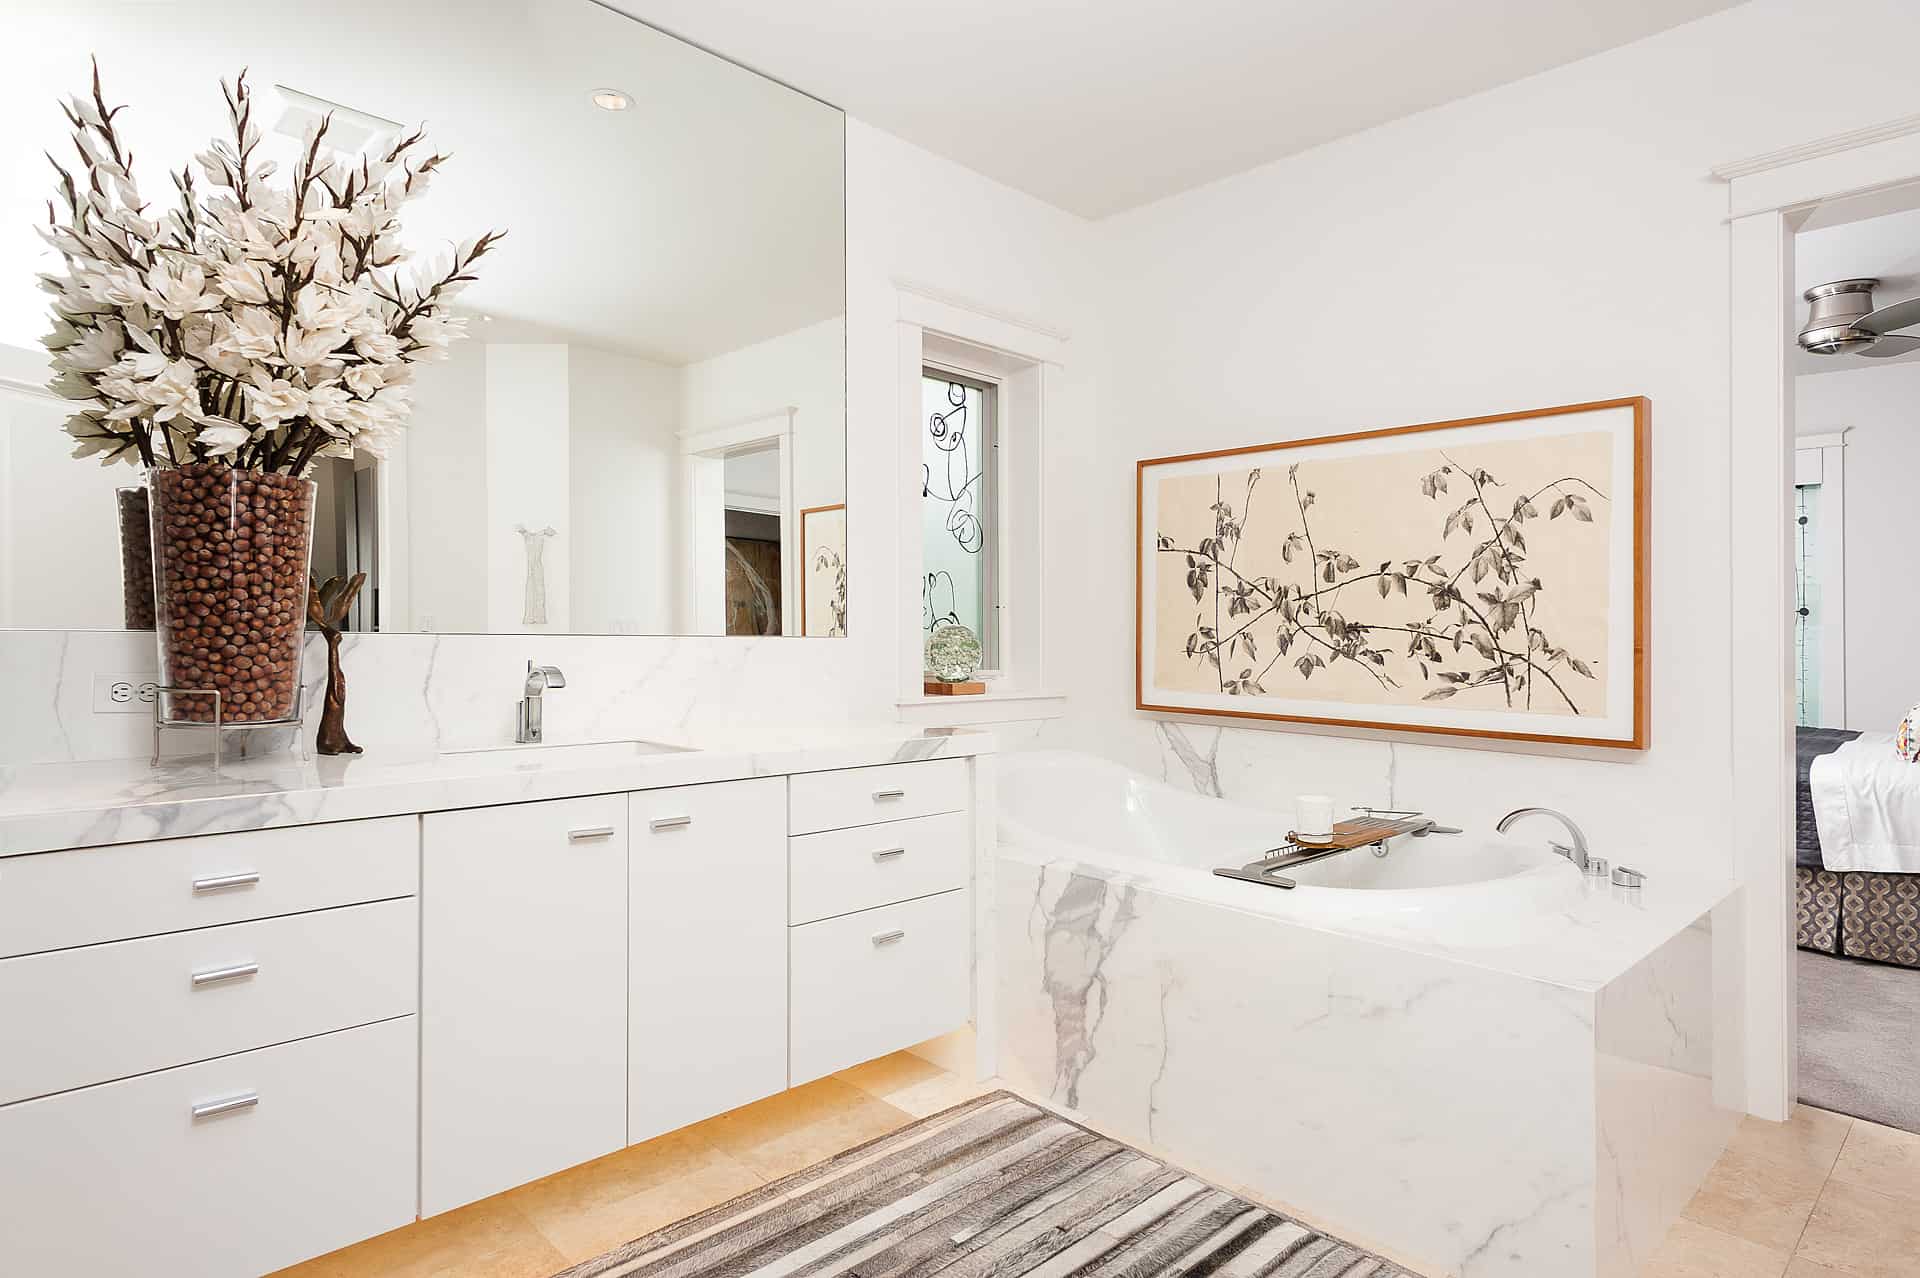 Neil Kelly took on this bathroom remodel to create a sanctuary for the owner